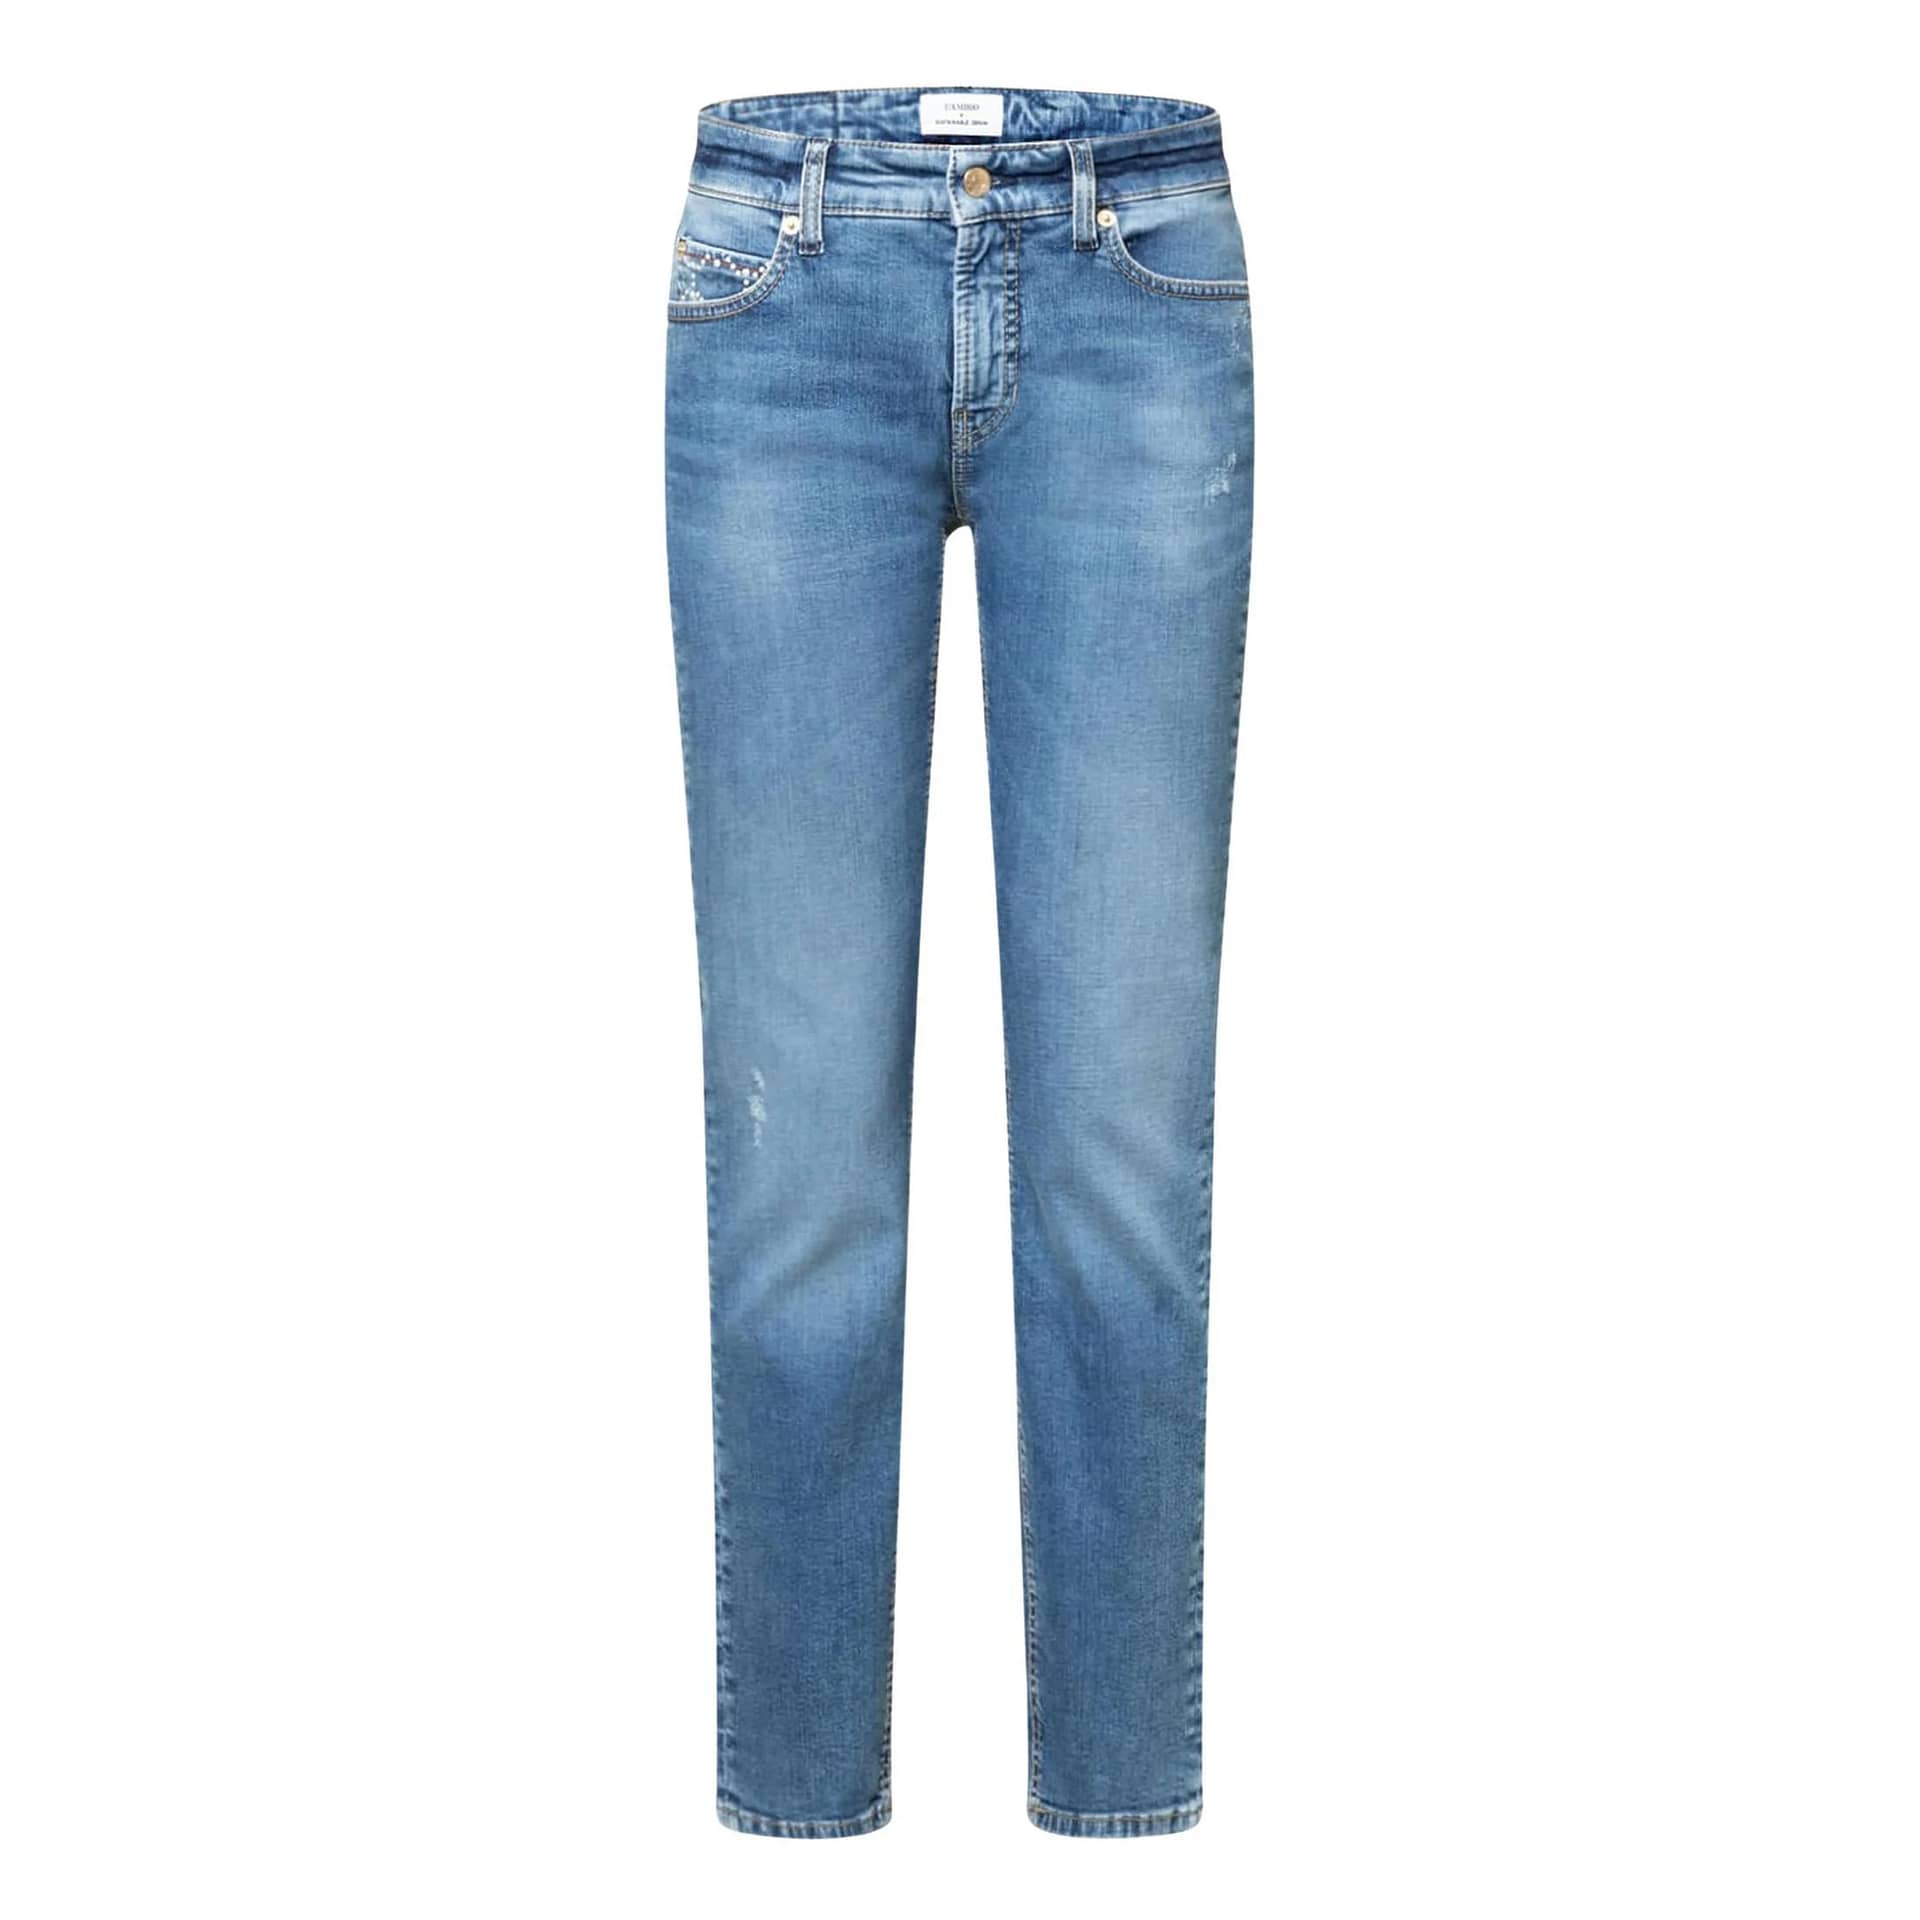 Cambio blauwe Paris jeans • shop BollyWolly